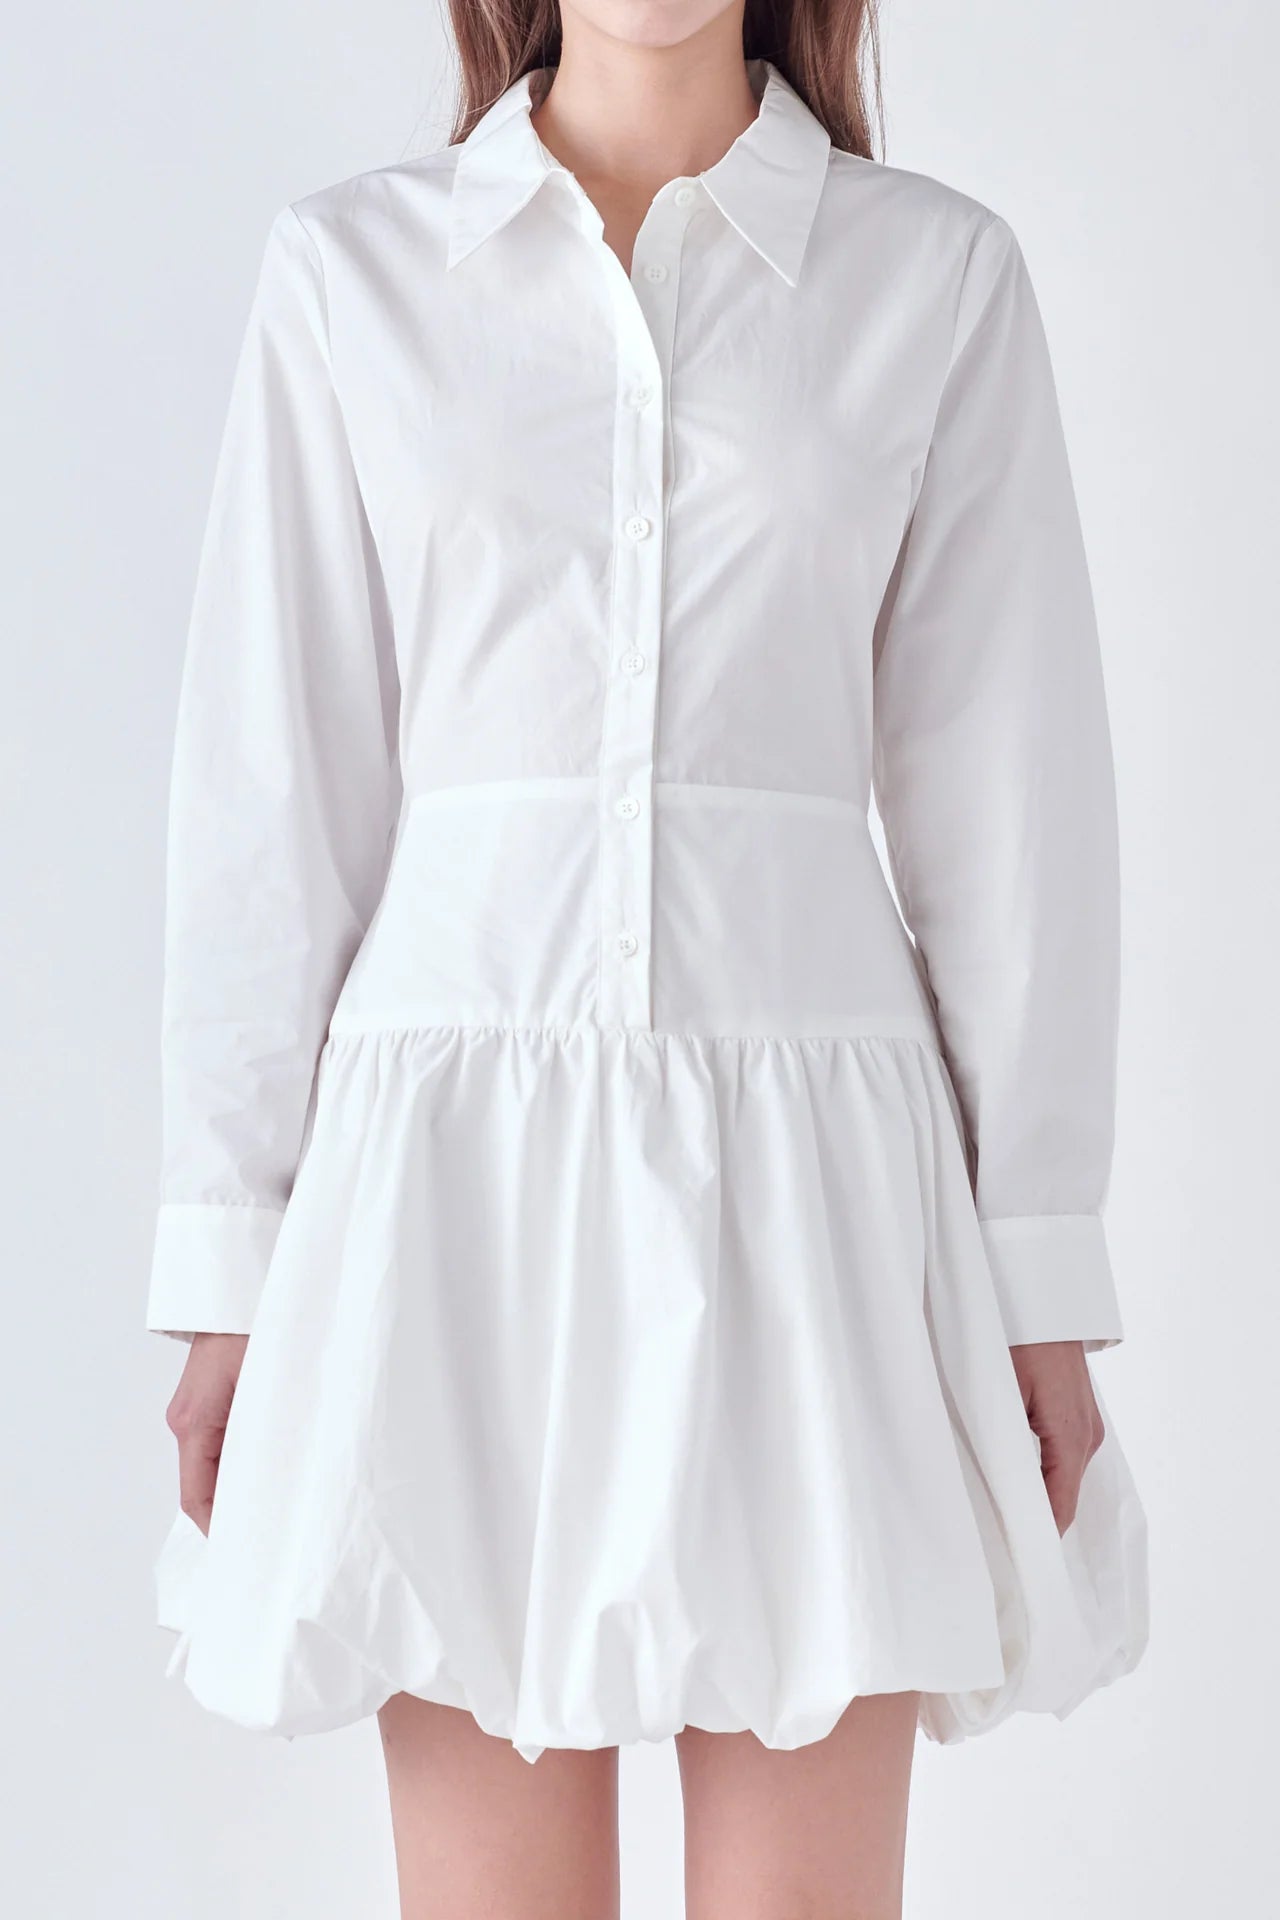 Photo of model wearing Poppy Poplin Button Up Dress in White With bubble skirt, button detailing, and collar available at UniKoncept in Waterloo close up front view